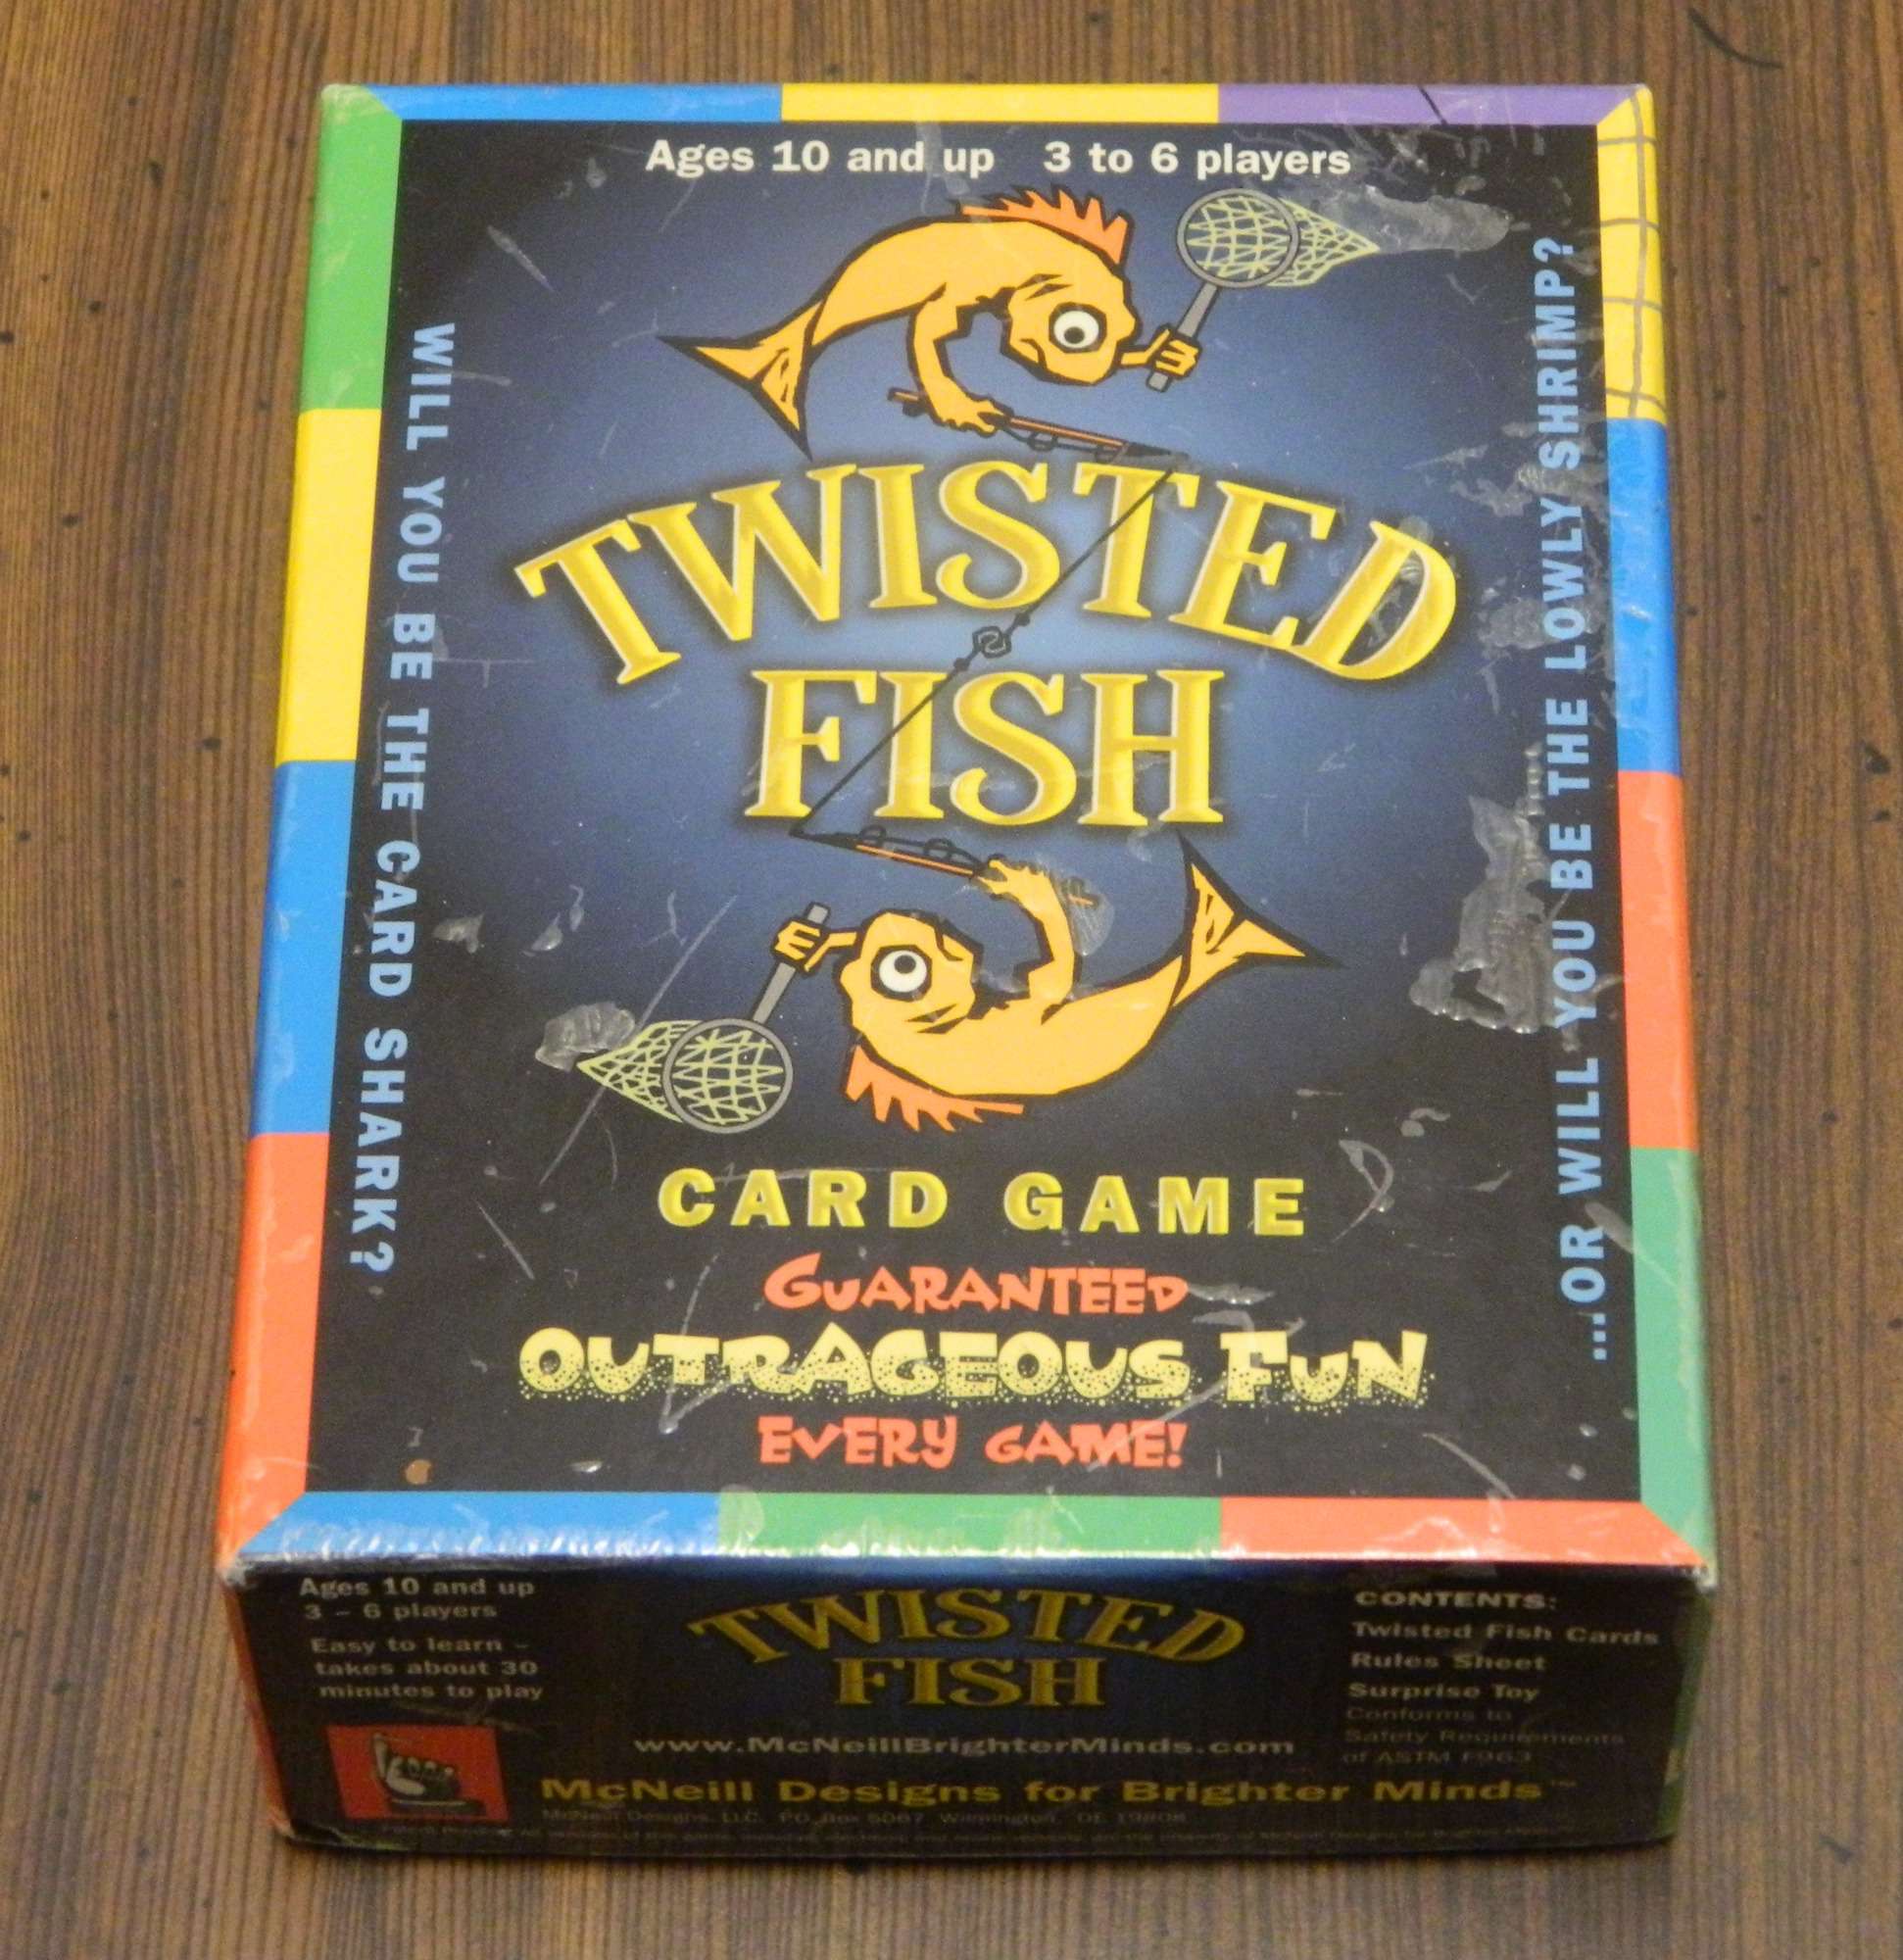 Twisted Fish Card Game Review